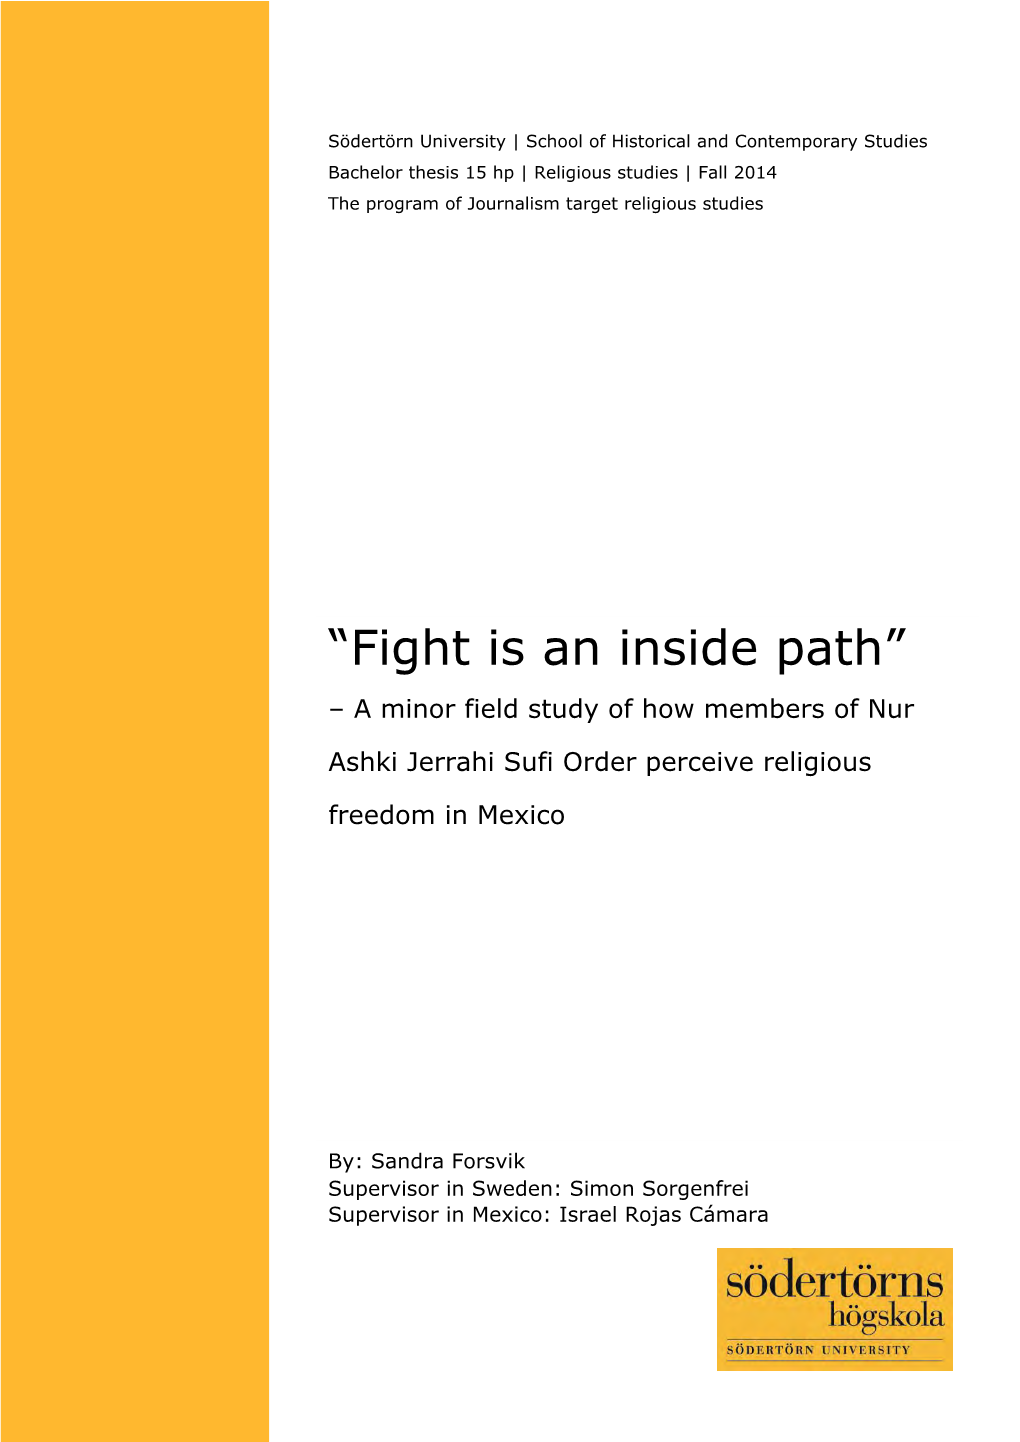 “Fight Is an Inside Path” – a Minor Field Study of How Members of Nur Ashki Jerrahi Sufi Order Perceive Religious Freedom in Mexico